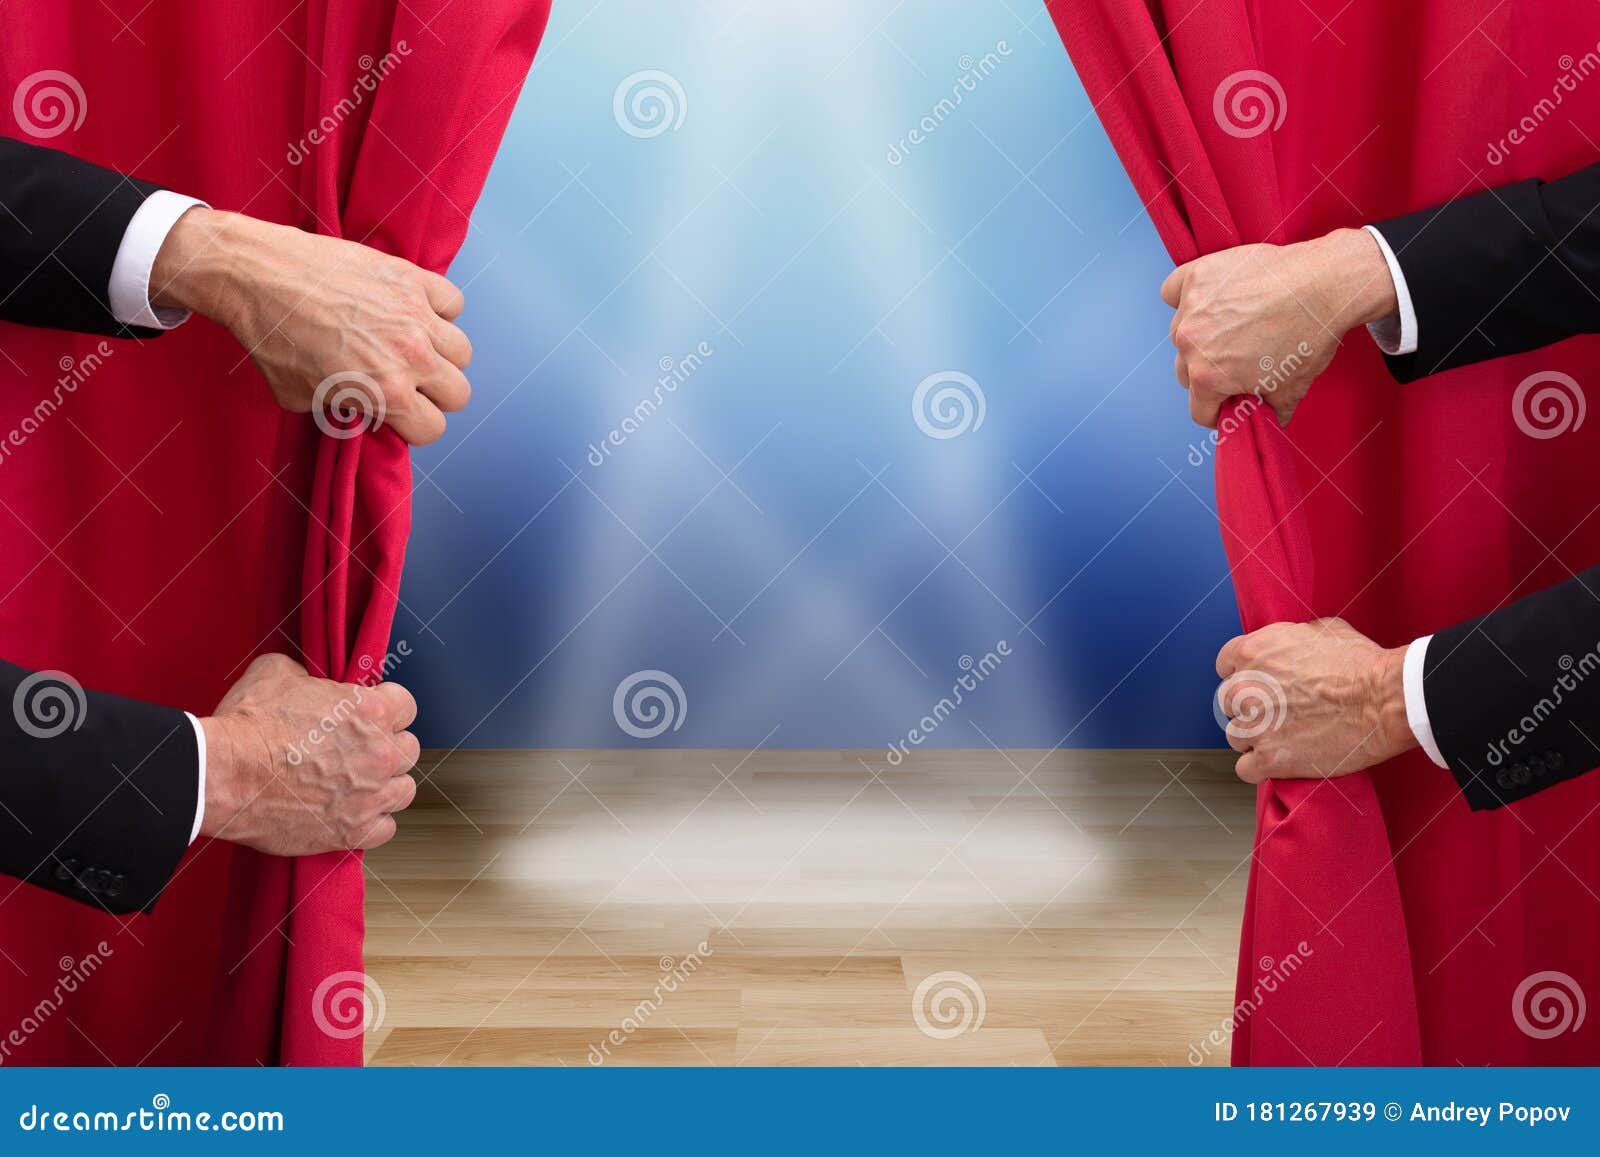 Two People Opening Red Stage Curtain Stock Image - Image of magic, beam